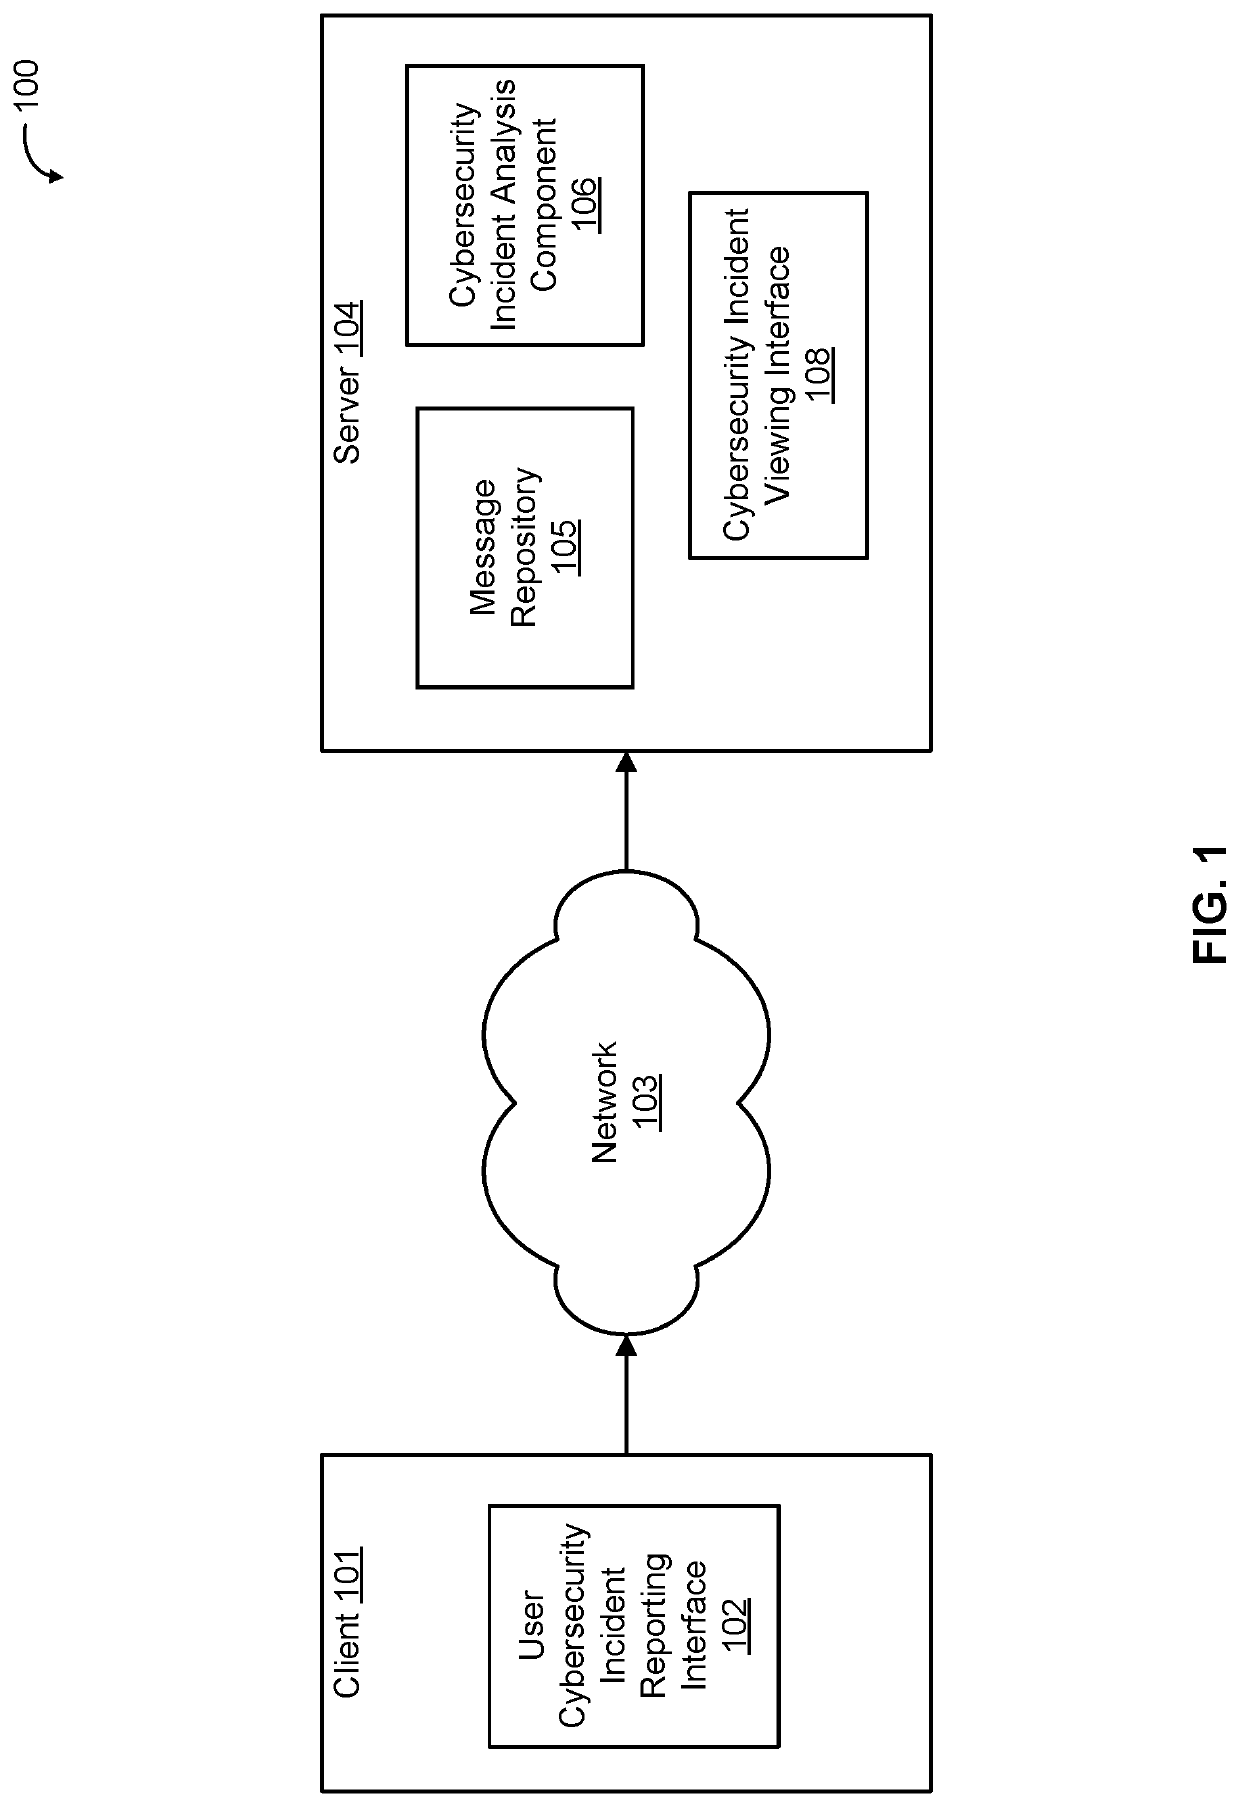 User-reported malicious message evaluation using machine learning